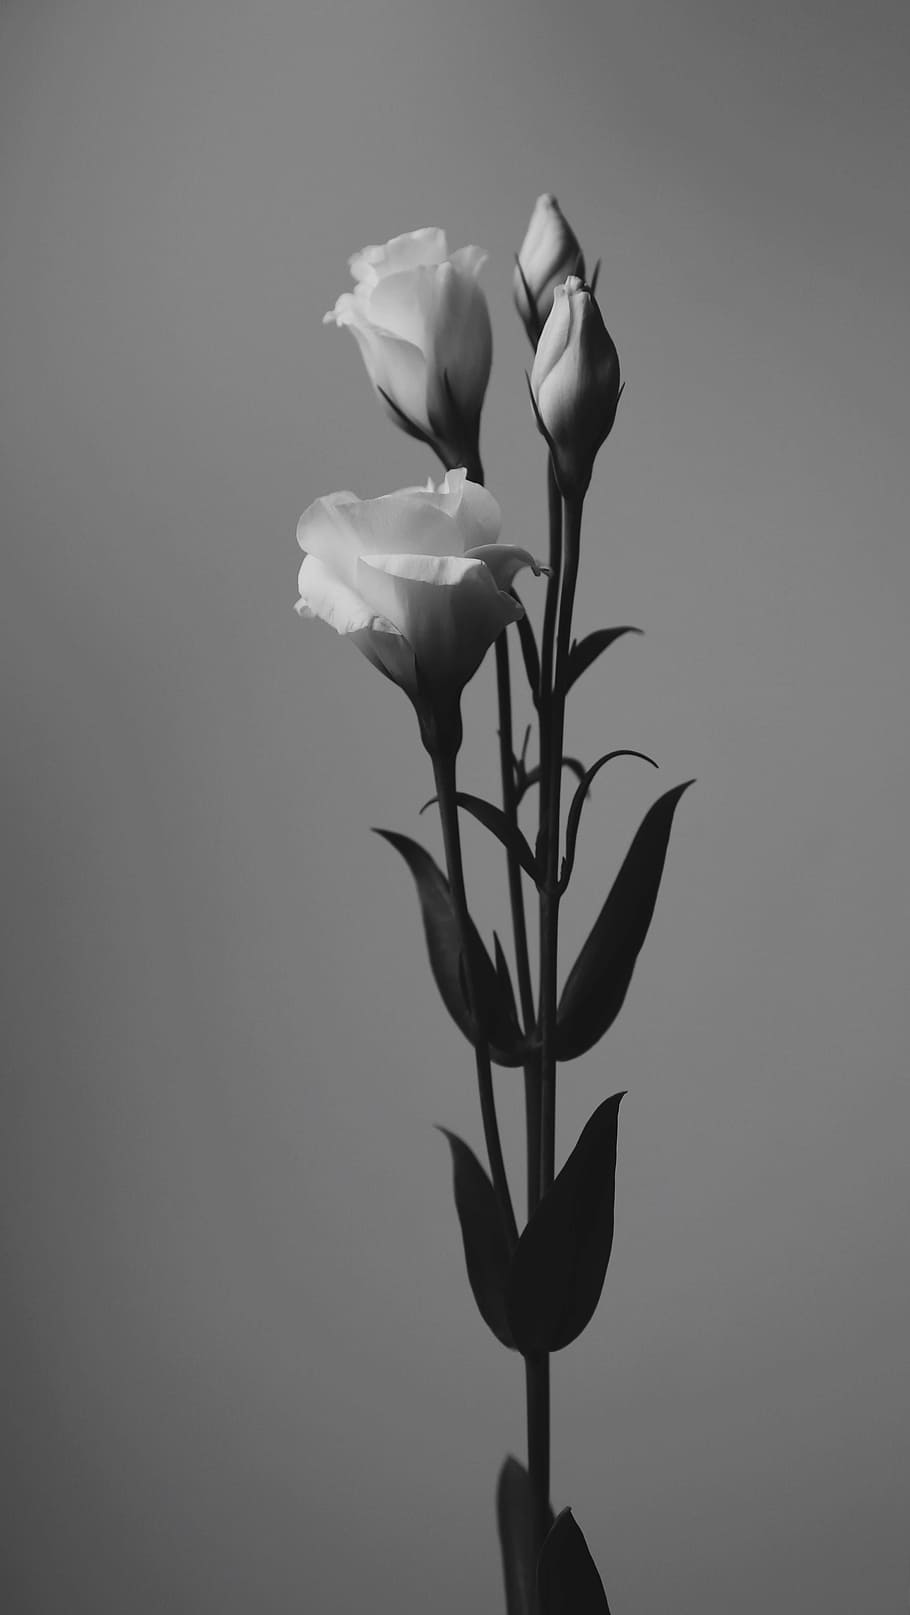 art, beautiful, black and white, blooming, blossom, bright, bud, HD wallpaper